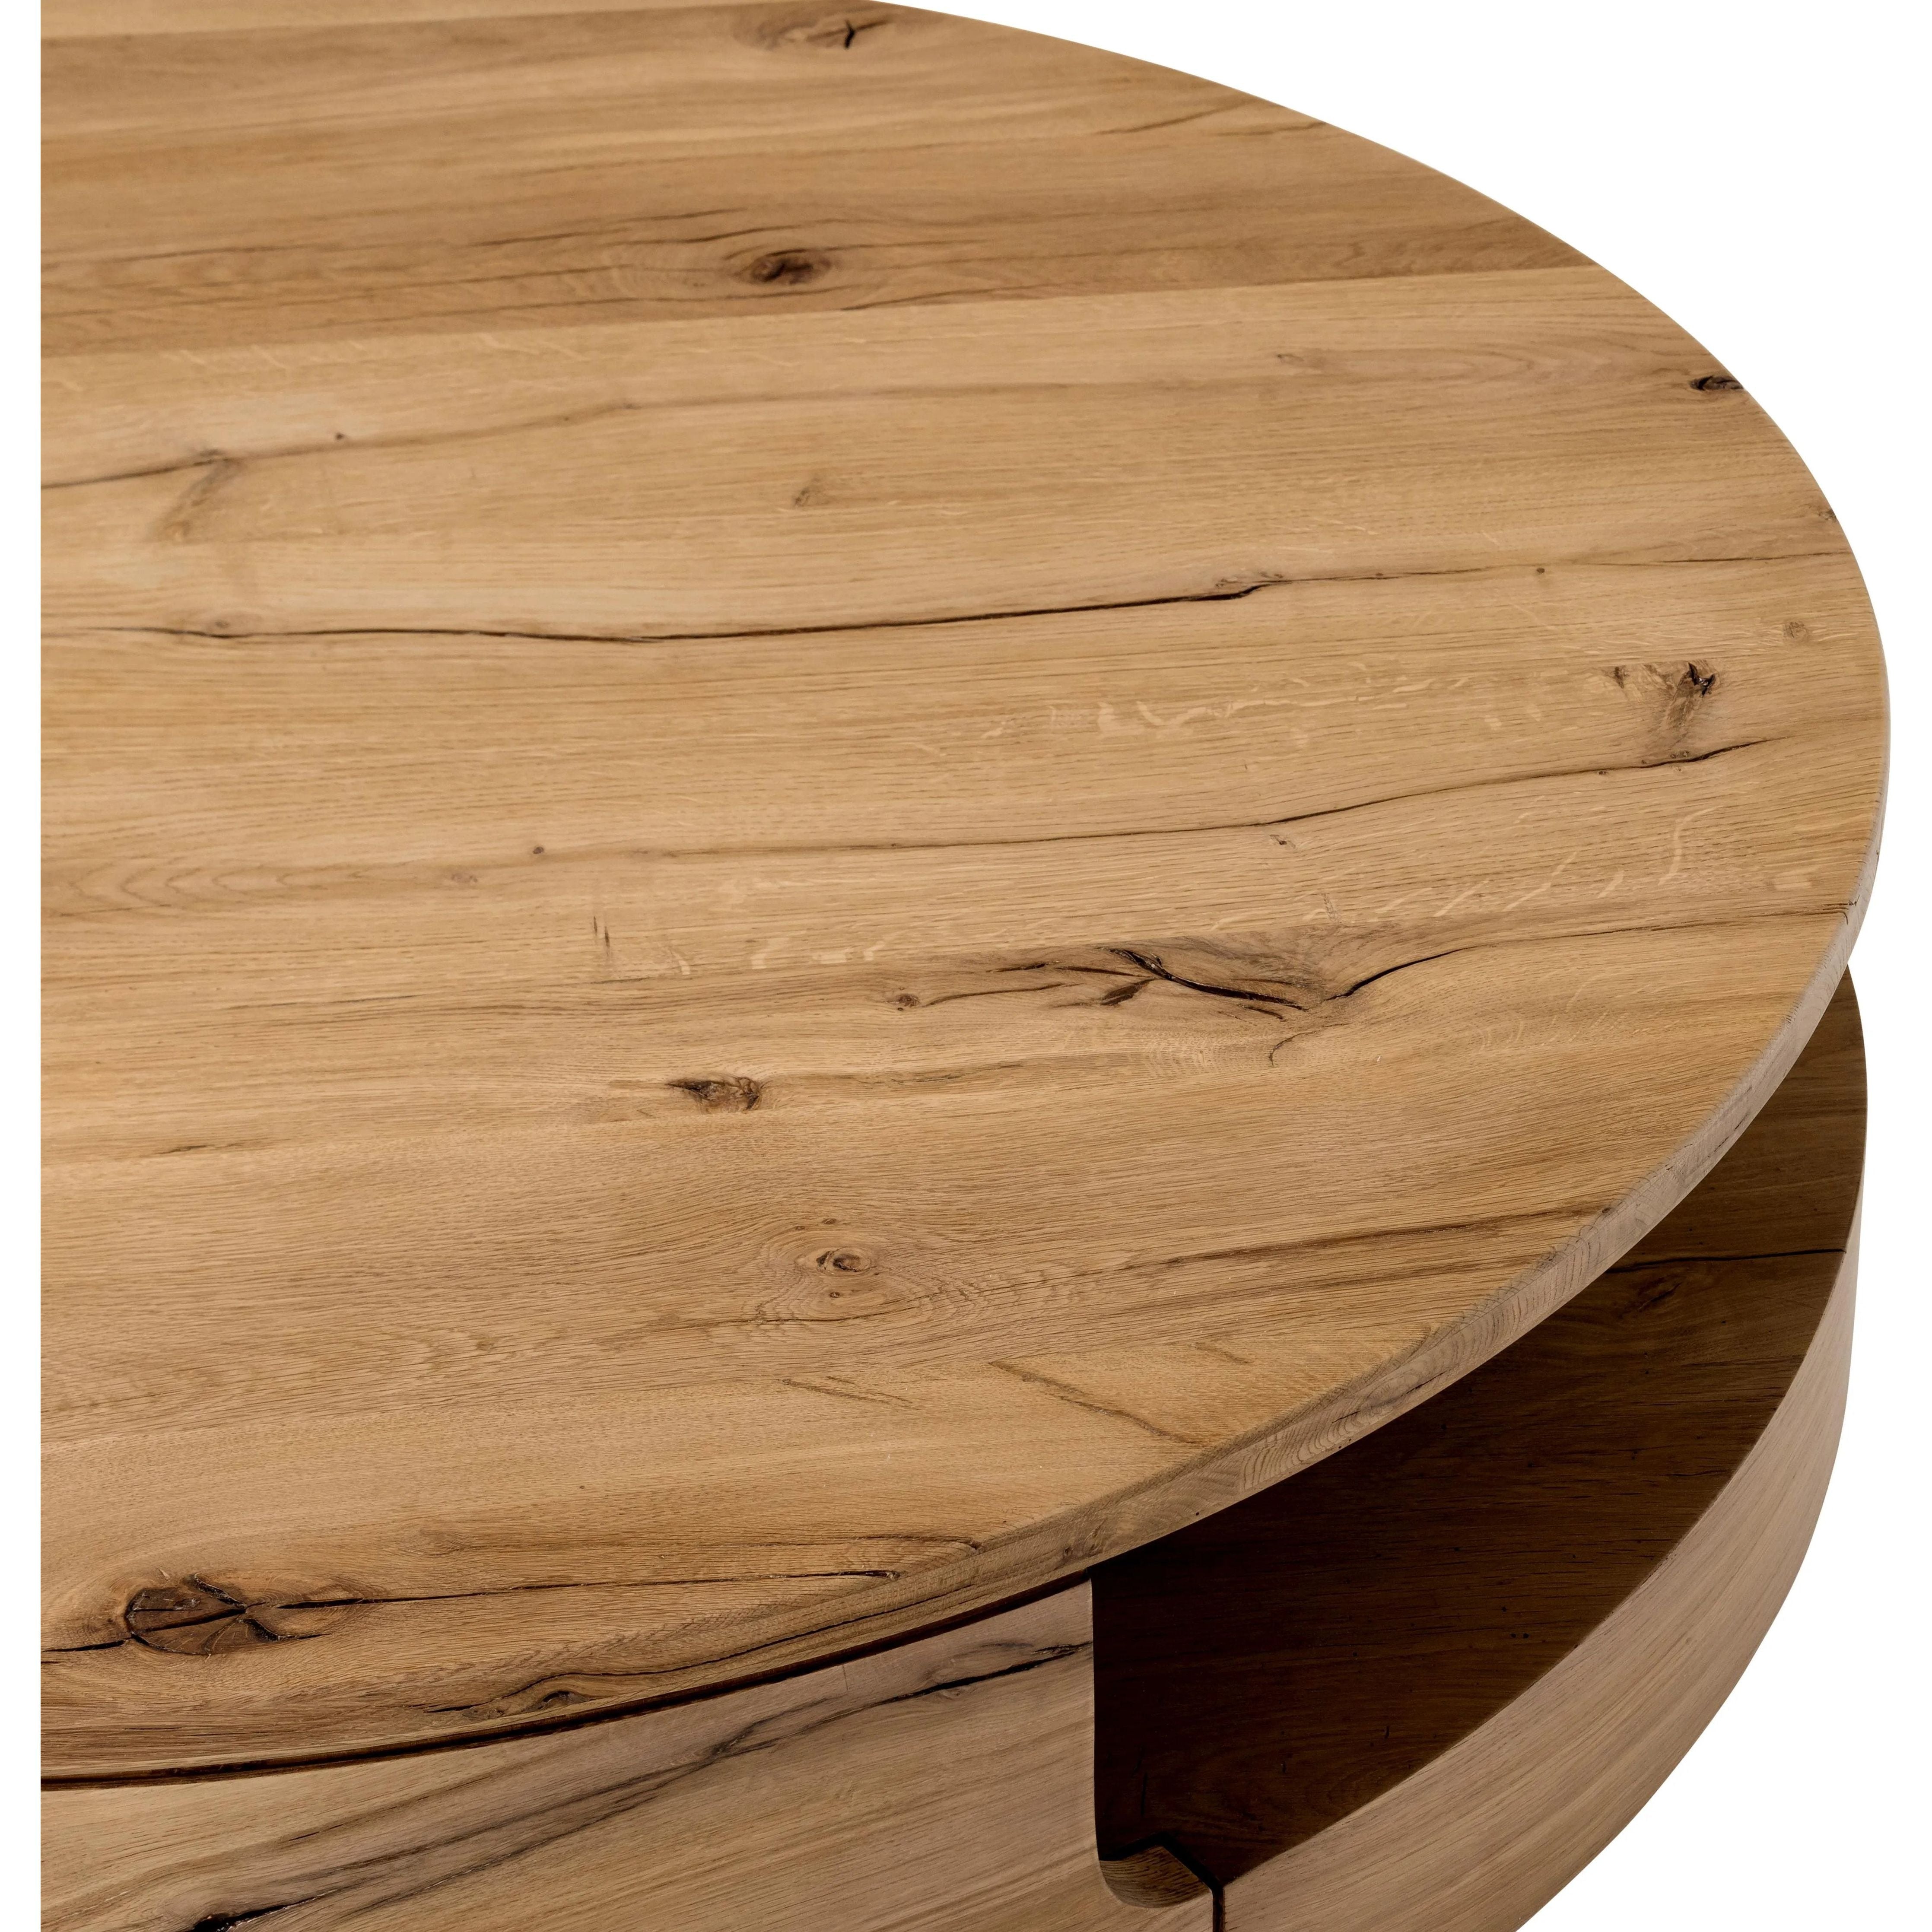 Designed in partnership with longtime Four Hands collaborator Thomas Bina and Brazilian designer Ronald Sasson. A rounded coffee table made from reclaimed French oak, features beautiful natural graining. Lower layer lightens the whole look, while brining the option for bonus storage or display.Collection: Bin Amethyst Home provides interior design, new home construction design consulting, vintage area rugs, and lighting in the Laguna Beach metro area.